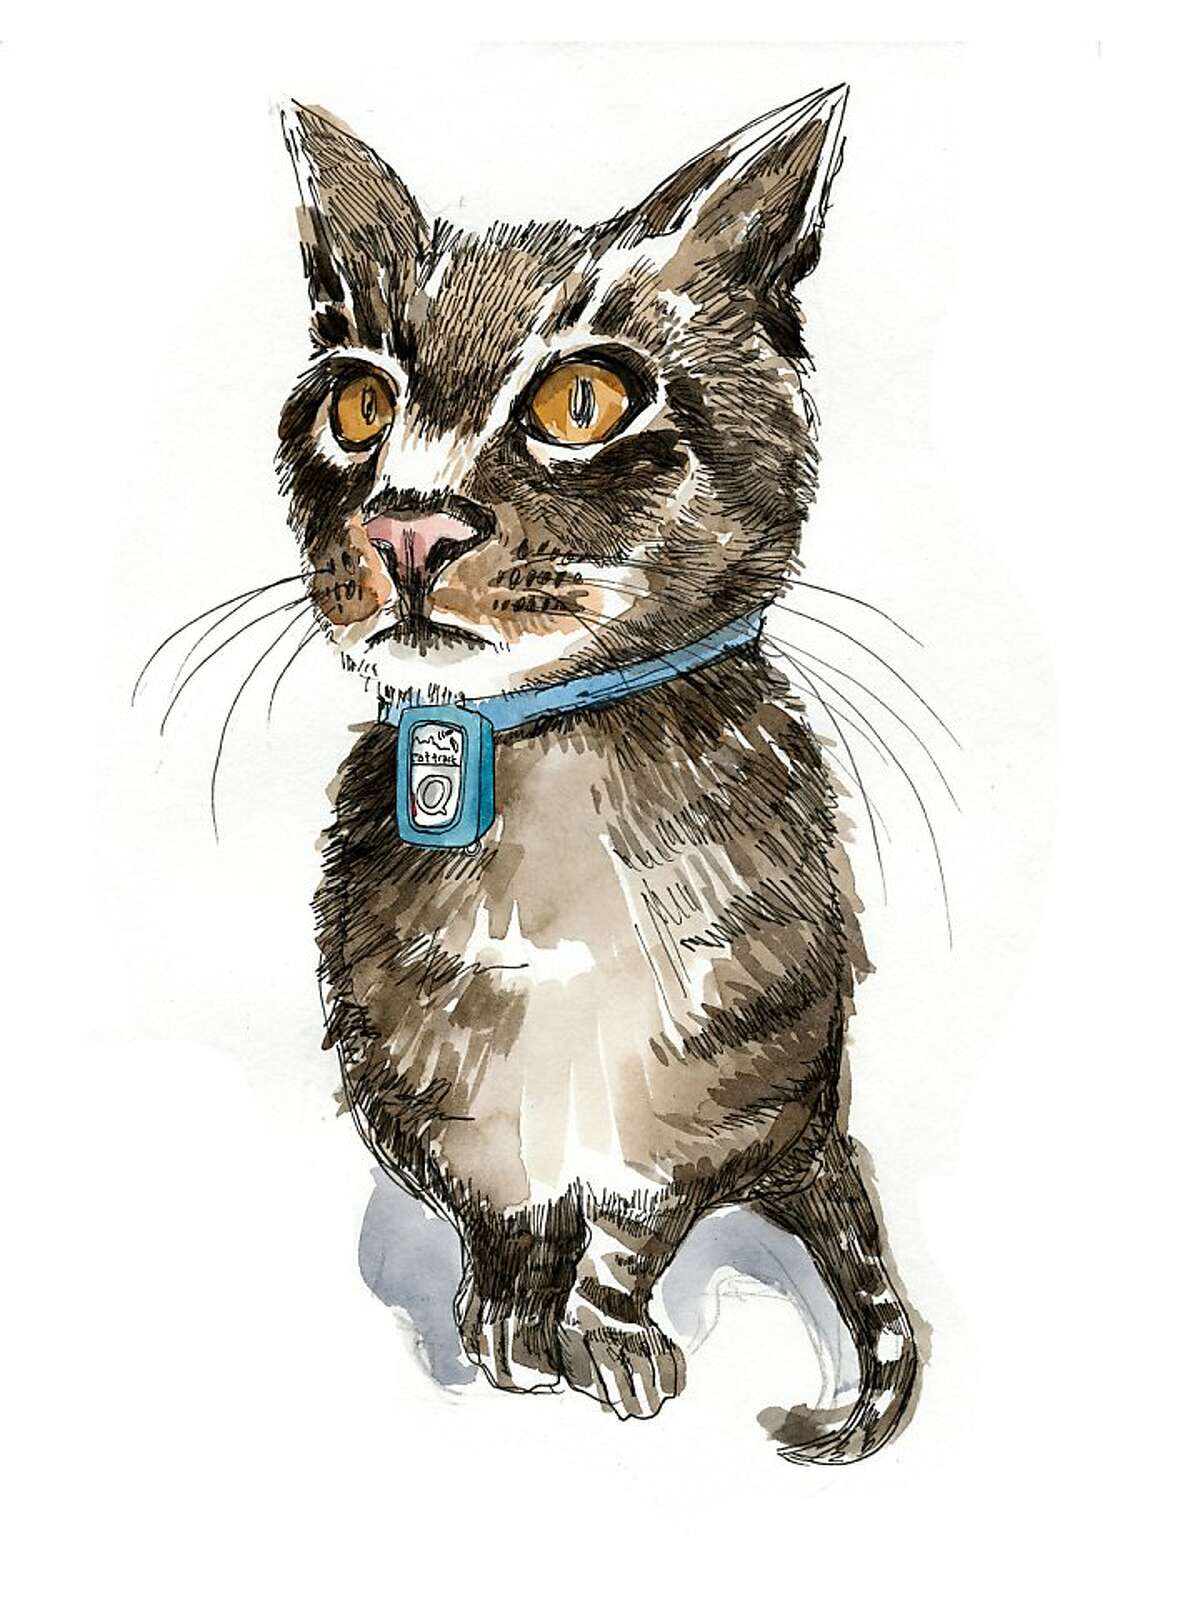 A drawing of Tibby, from Lost Cat, by Caroline Paul and illustrated by Wendy MacNaughton